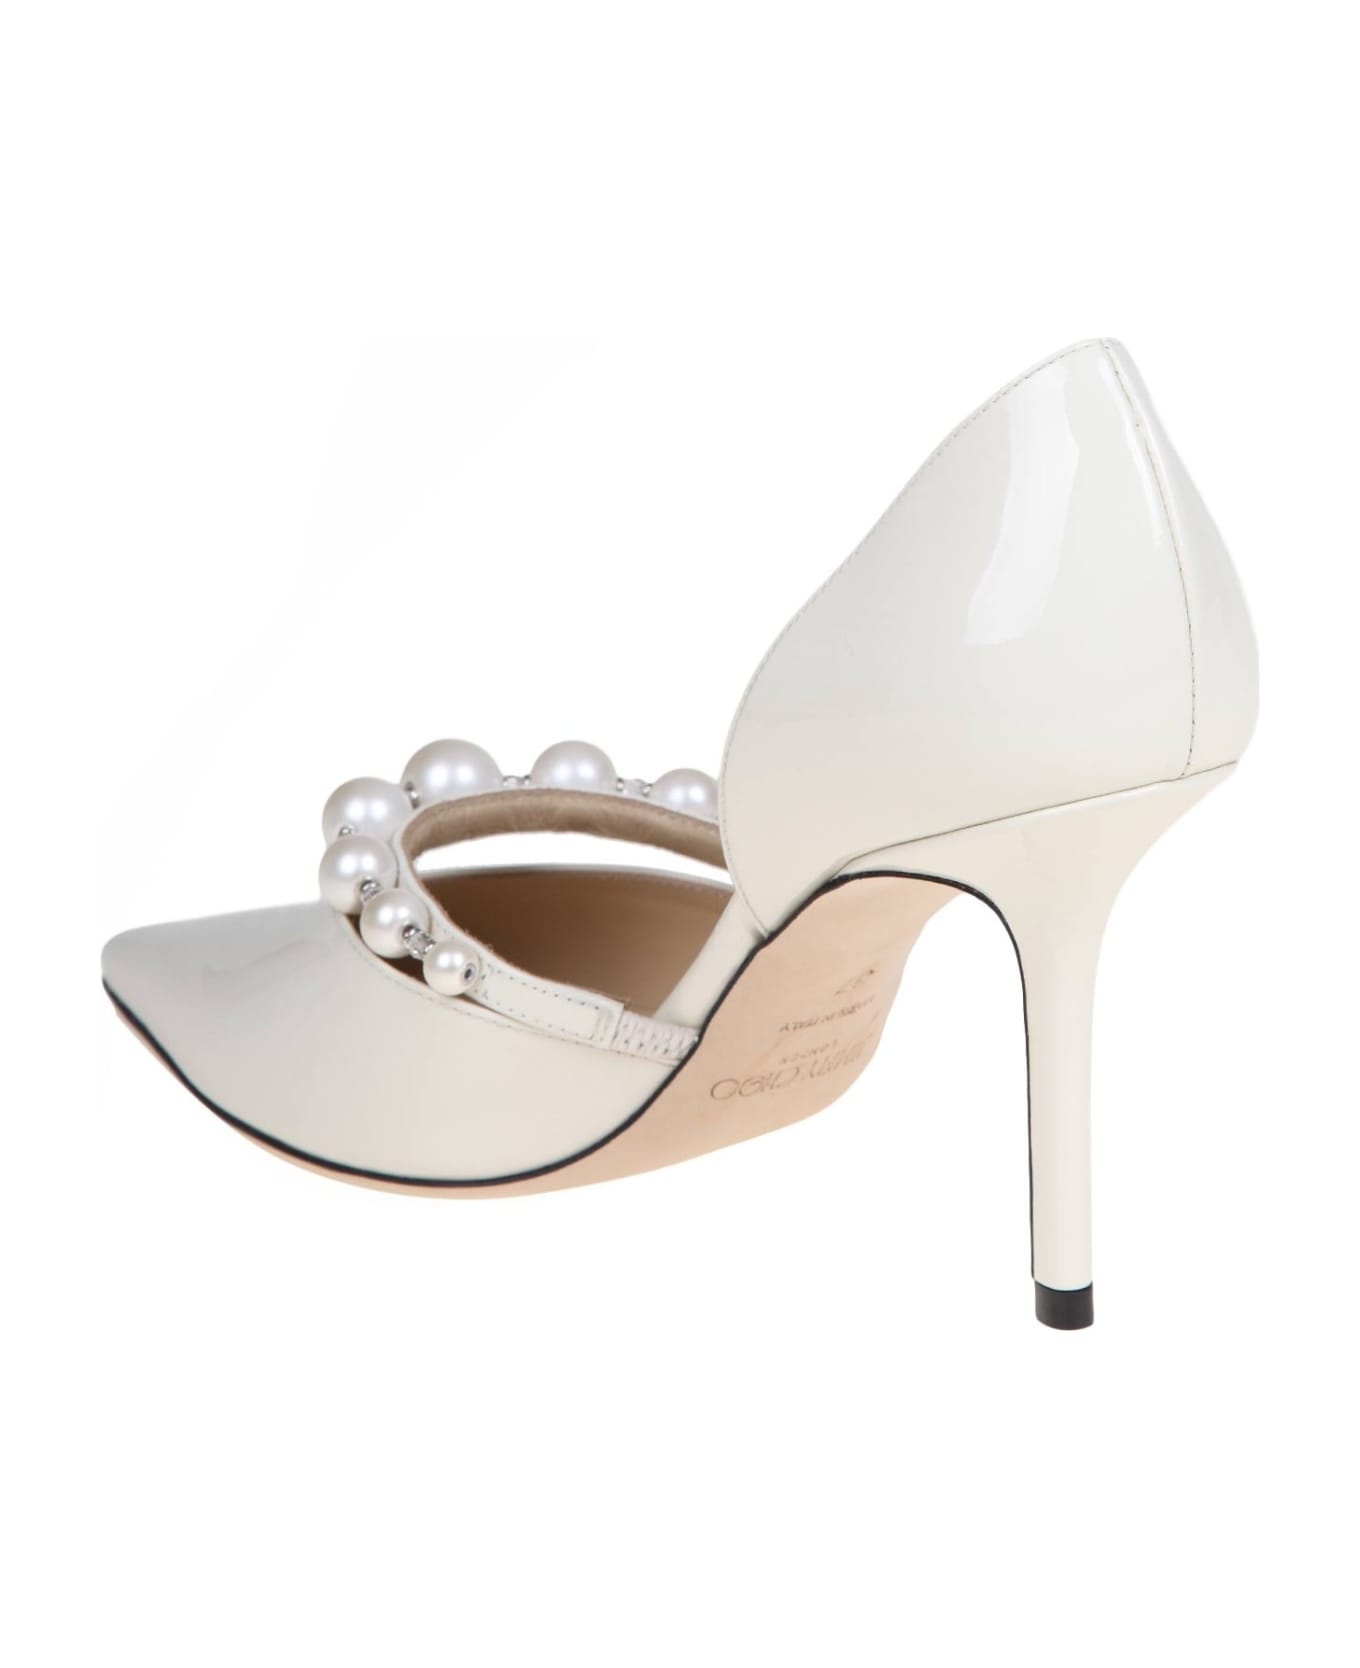 Aurelie 85 Patent Leather Pumps With Applied Pearls - 4